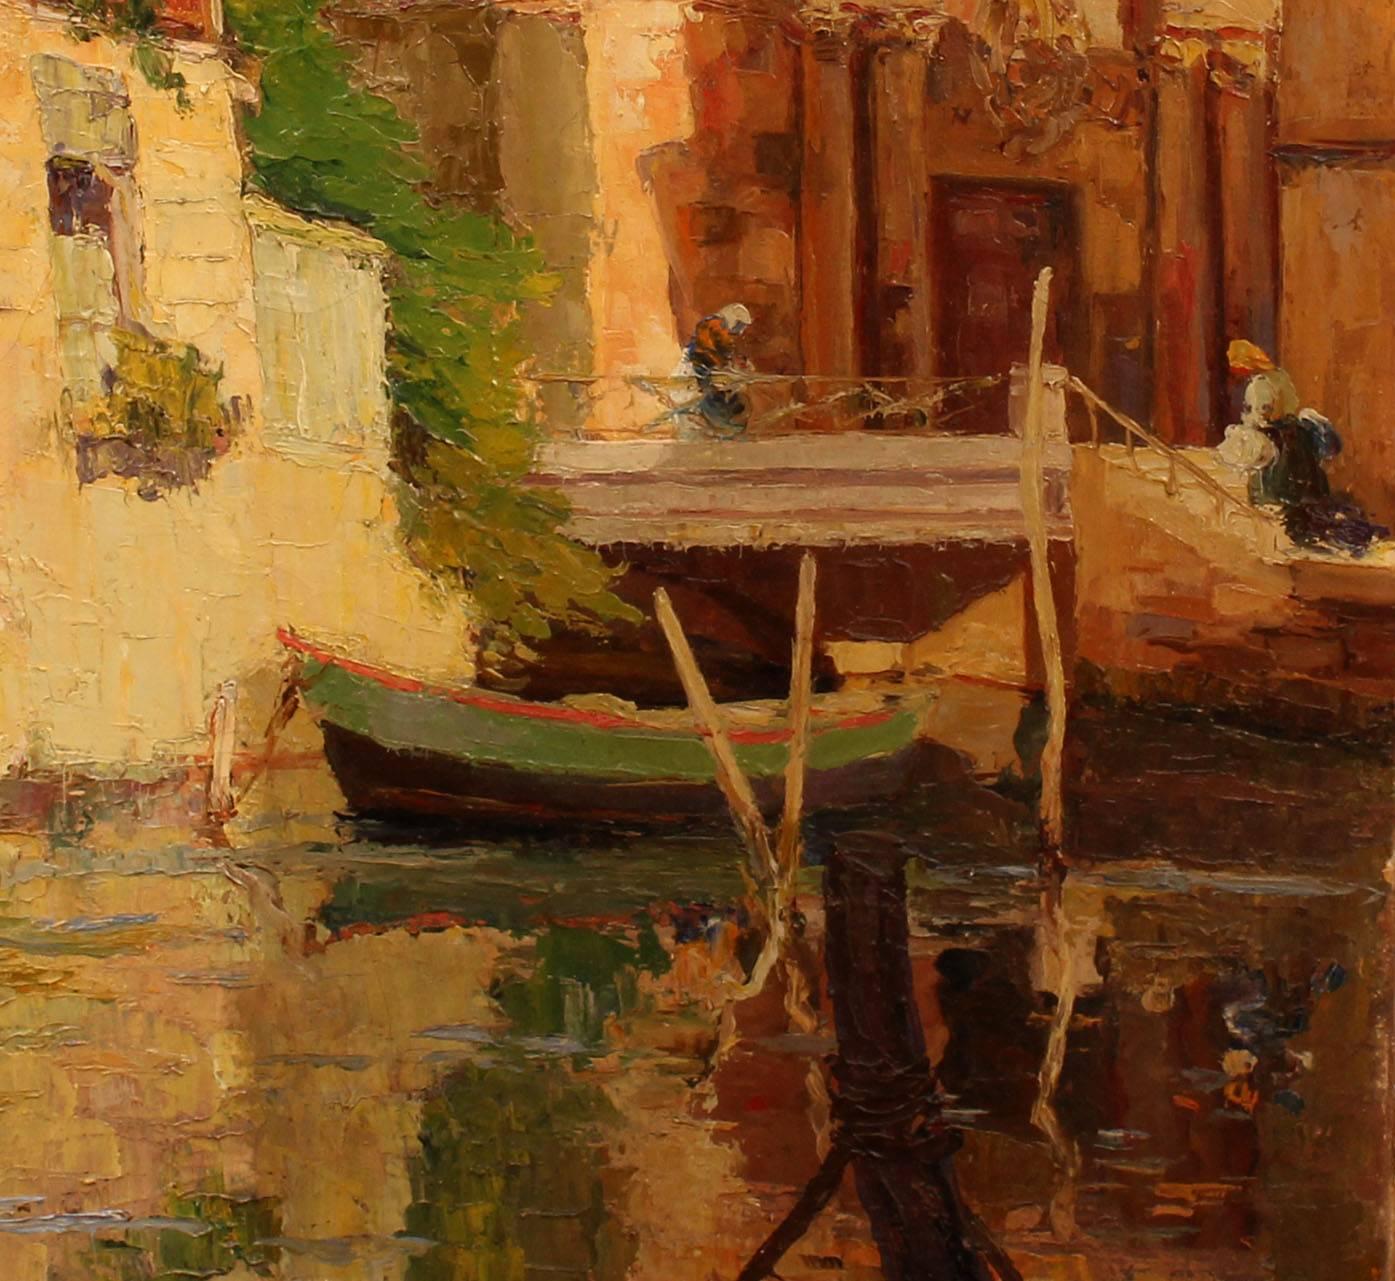 Sunny Venetian canal scene. Oil on canvas. Signed illegibly lower right. Unframed.